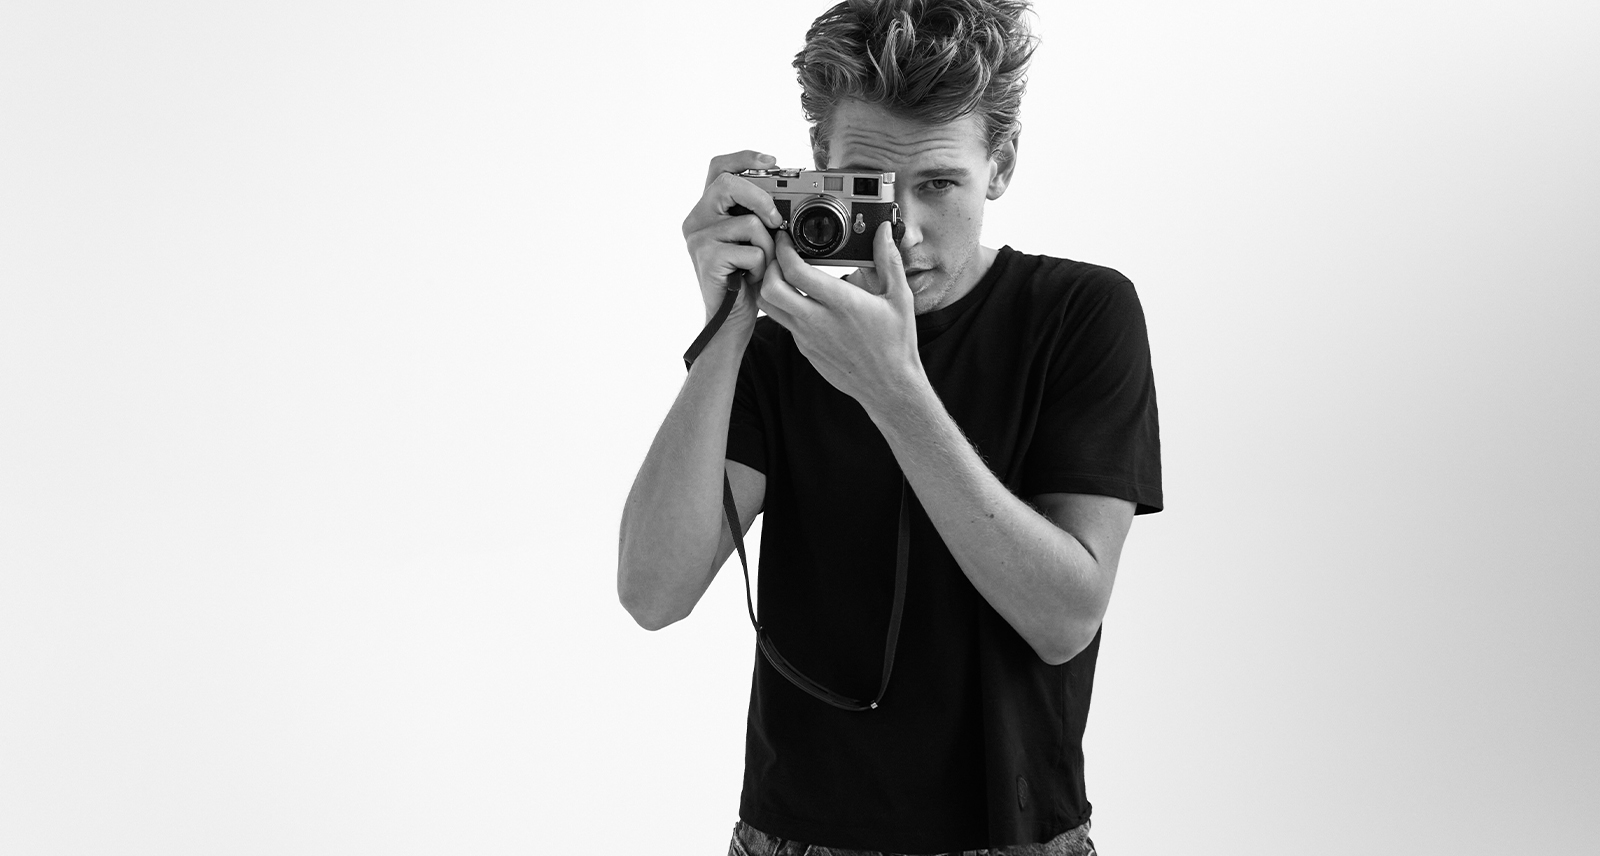 Austin Butler poses with camera for YSL Beauty MYSLF campaign, in black and white